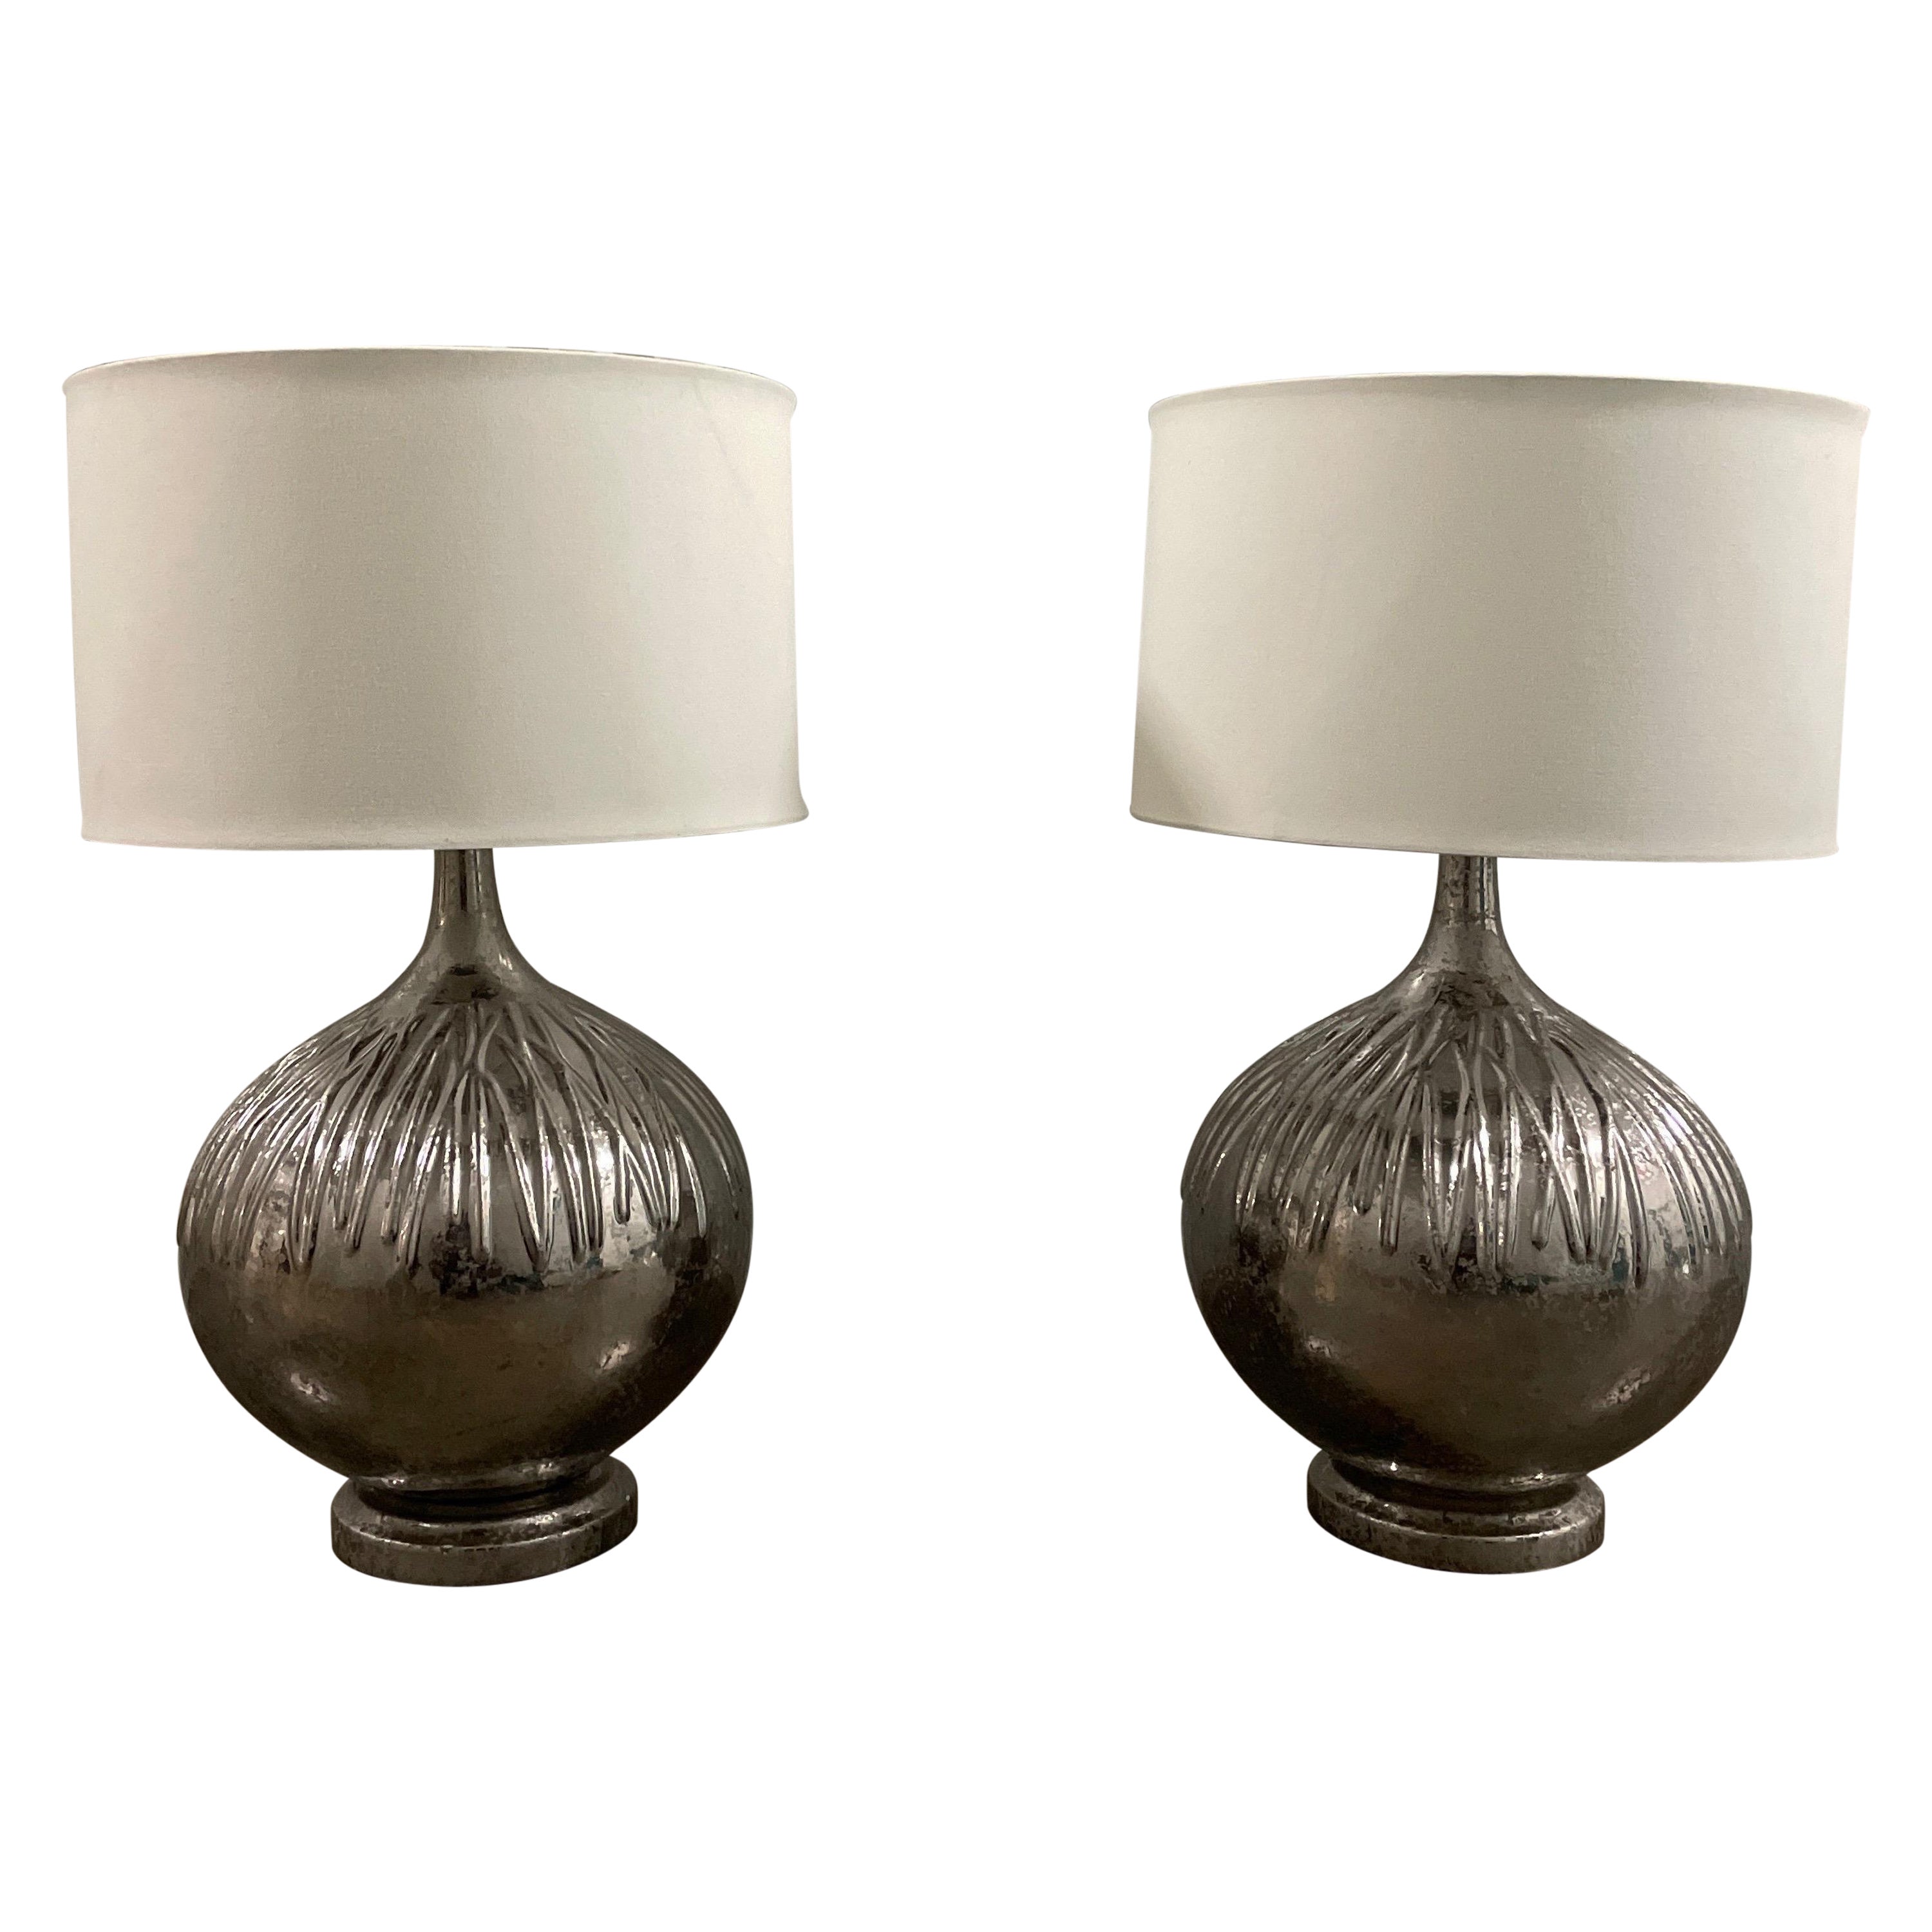 Pair of Large Scale Organic Mercury Type Glass Lamps For Sale